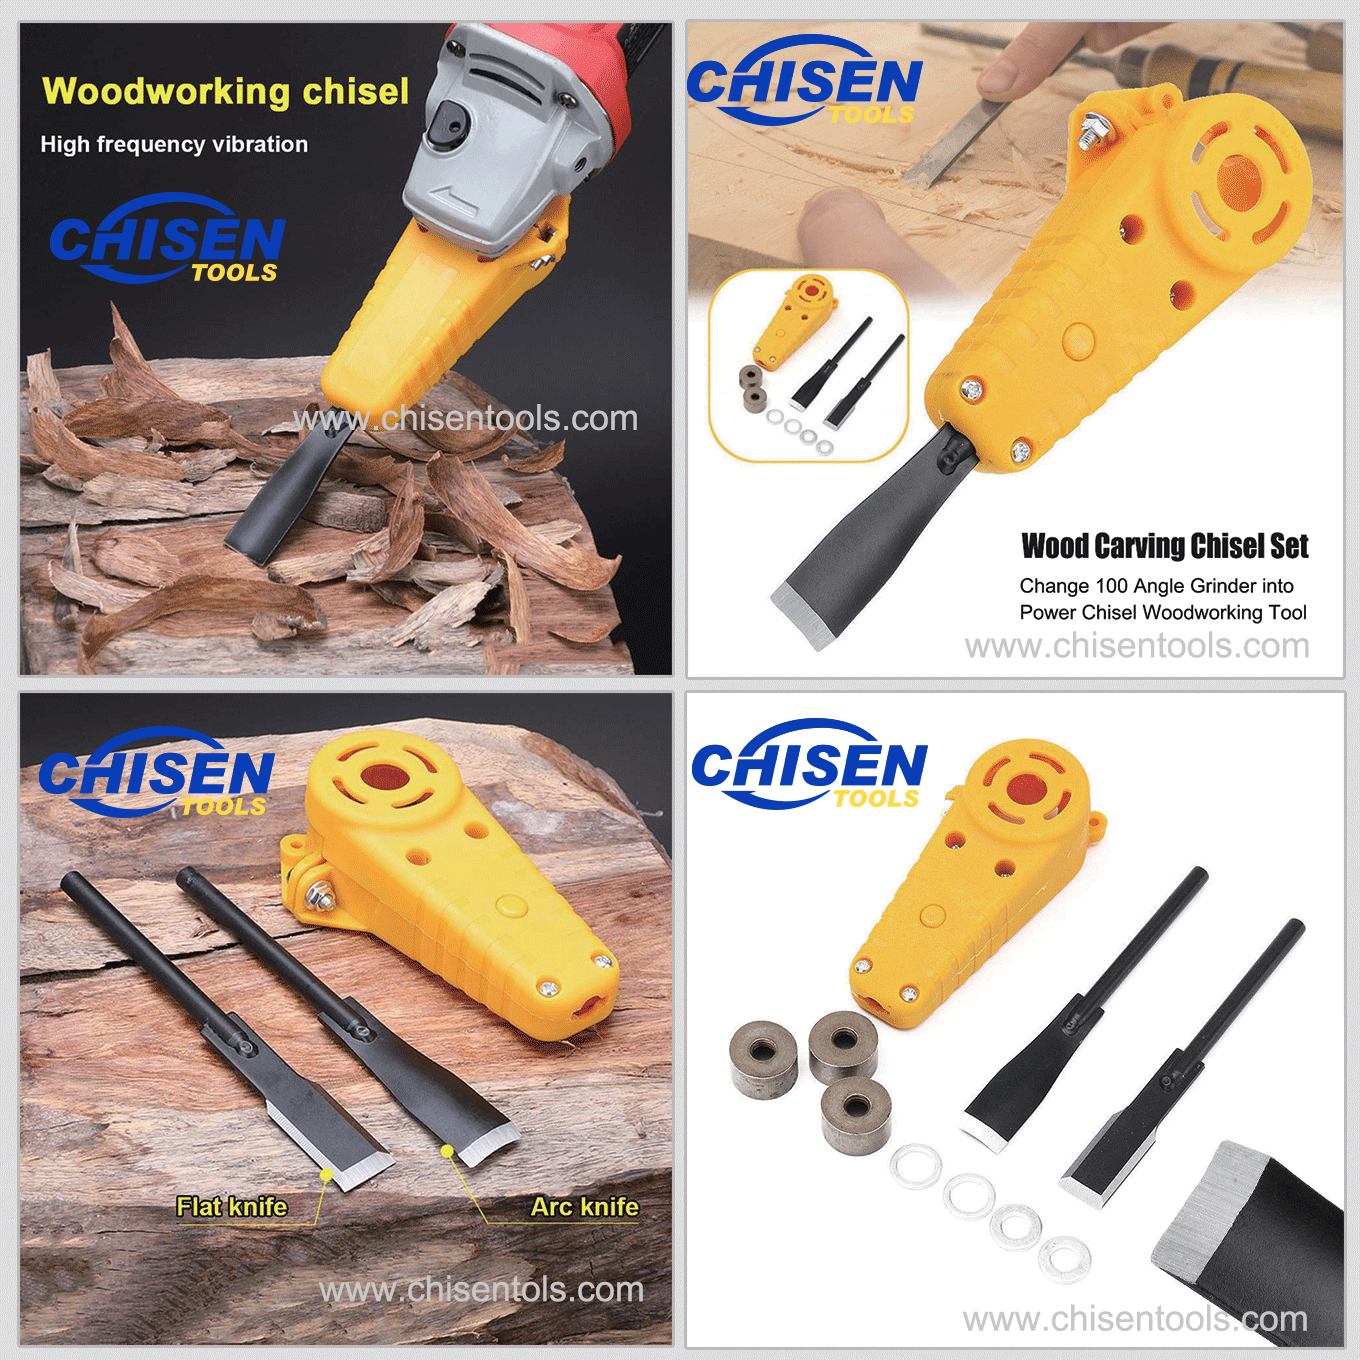 Features of Electric Power Wood Carving Chisel Set for Angle Grinder